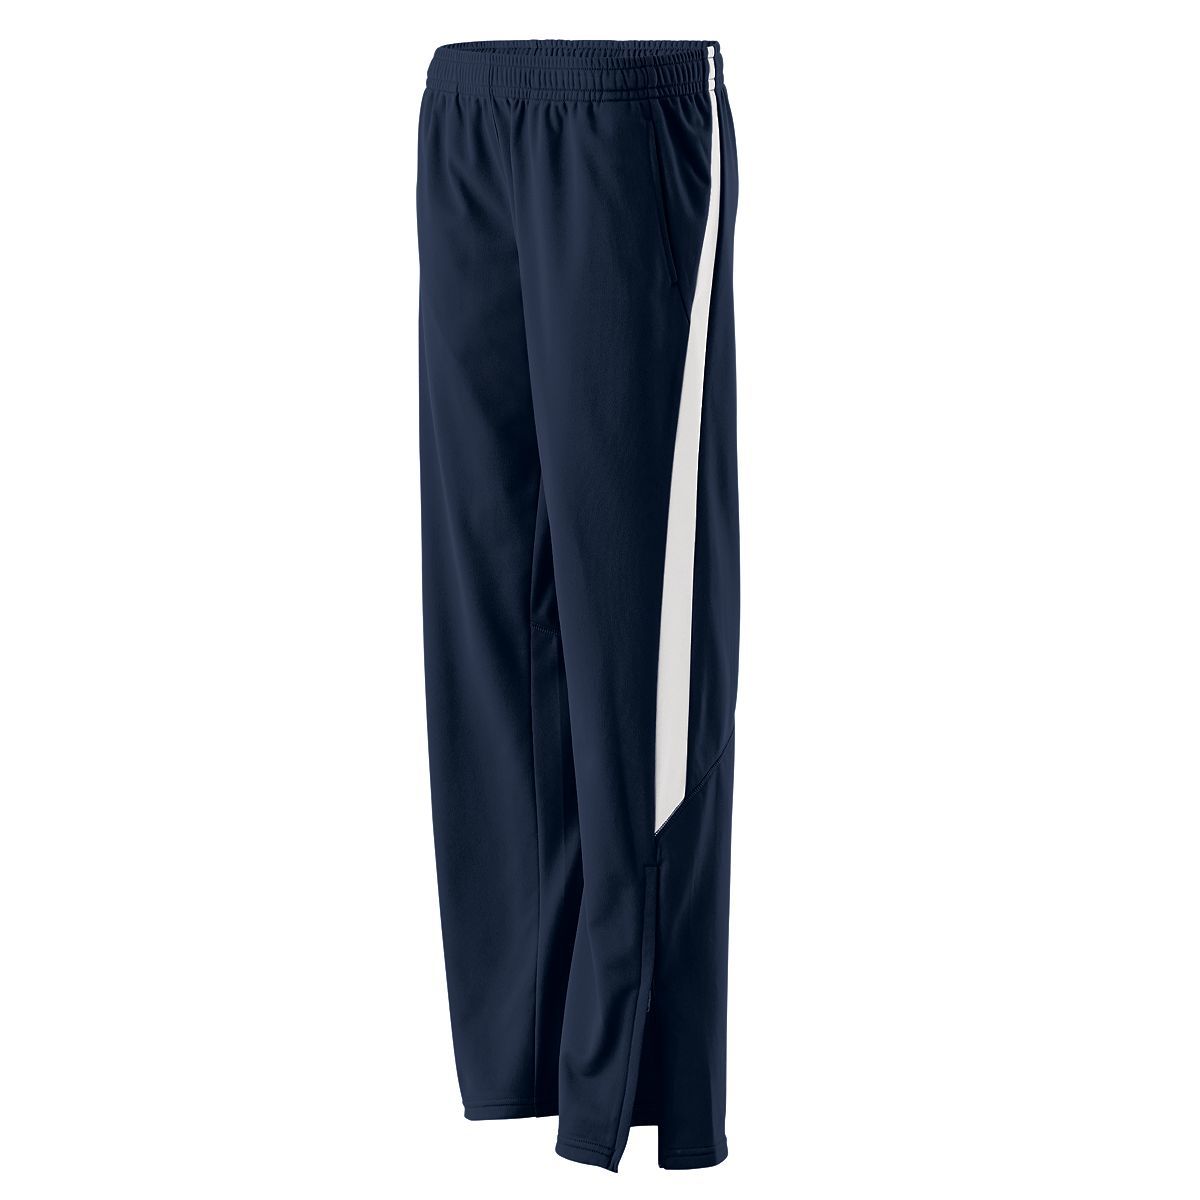 Holloway Ladies Determination Pant in Navy/White  -Part of the Ladies, Ladies-Pants, Pants, Holloway product lines at KanaleyCreations.com